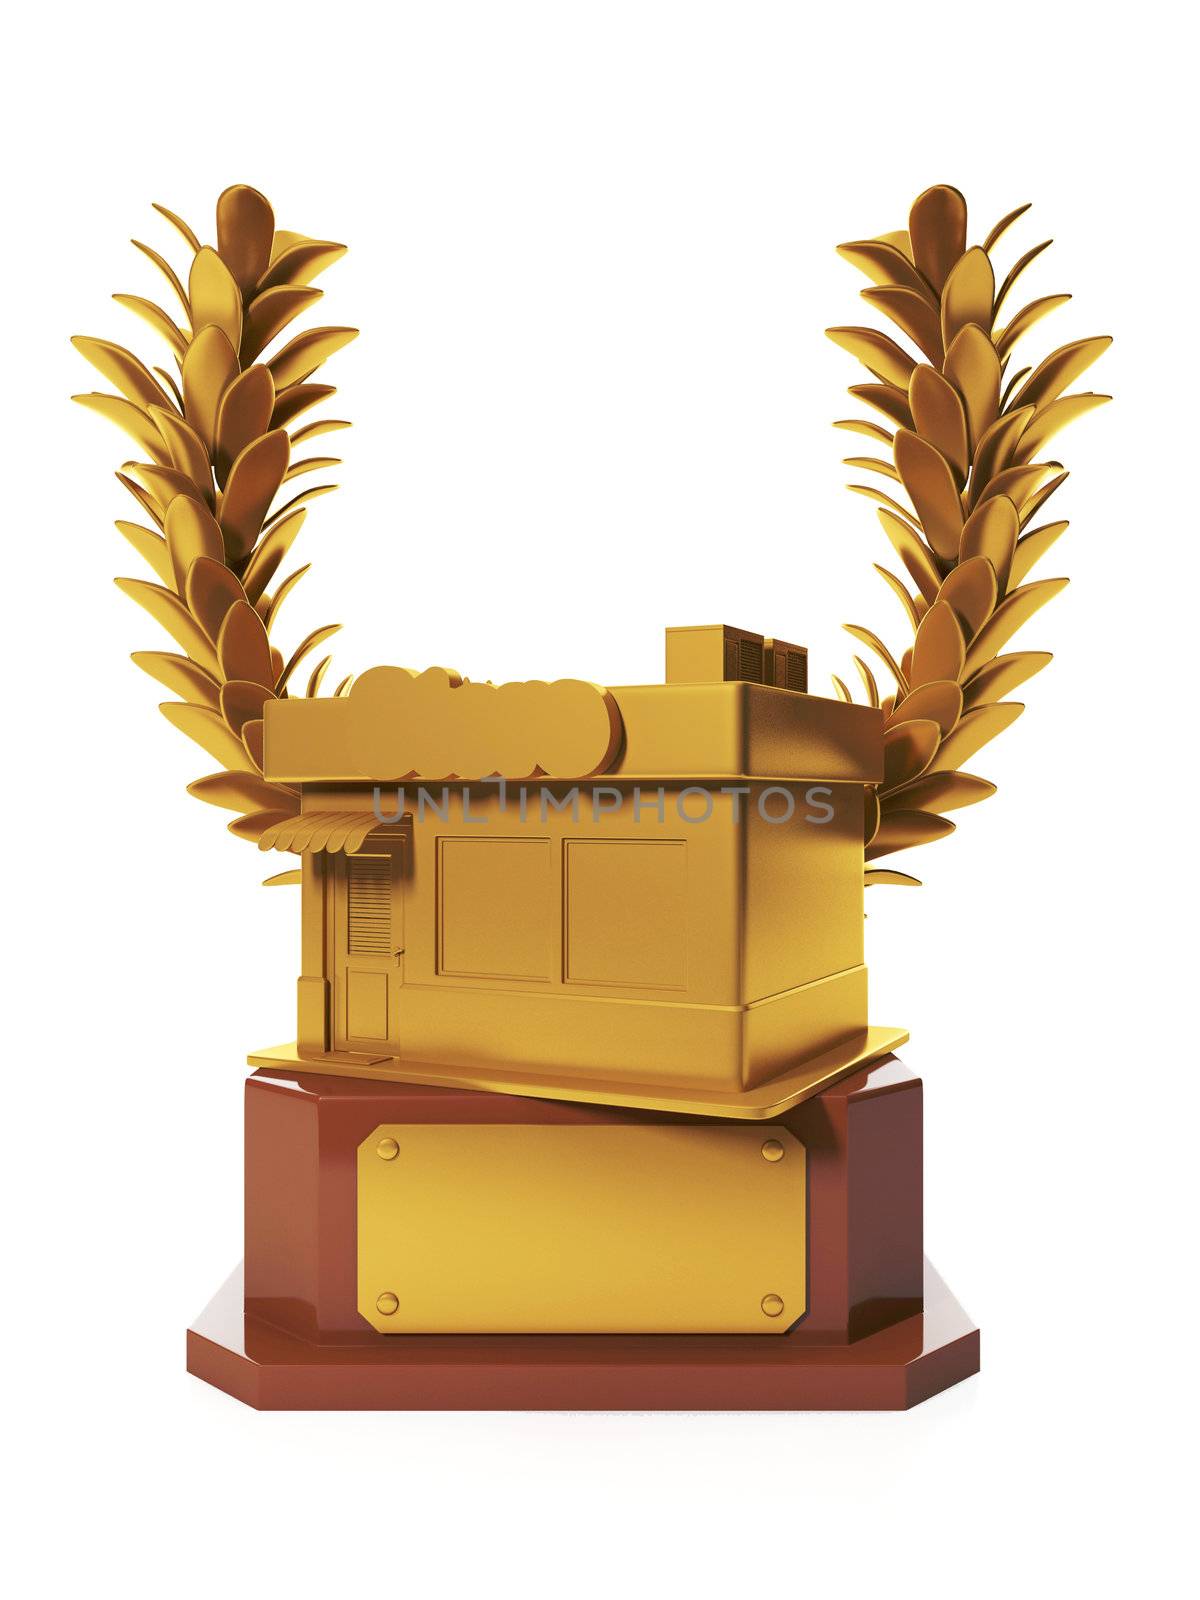 3d illustration: Prizes and awards. Award for the best shop, achievement and success